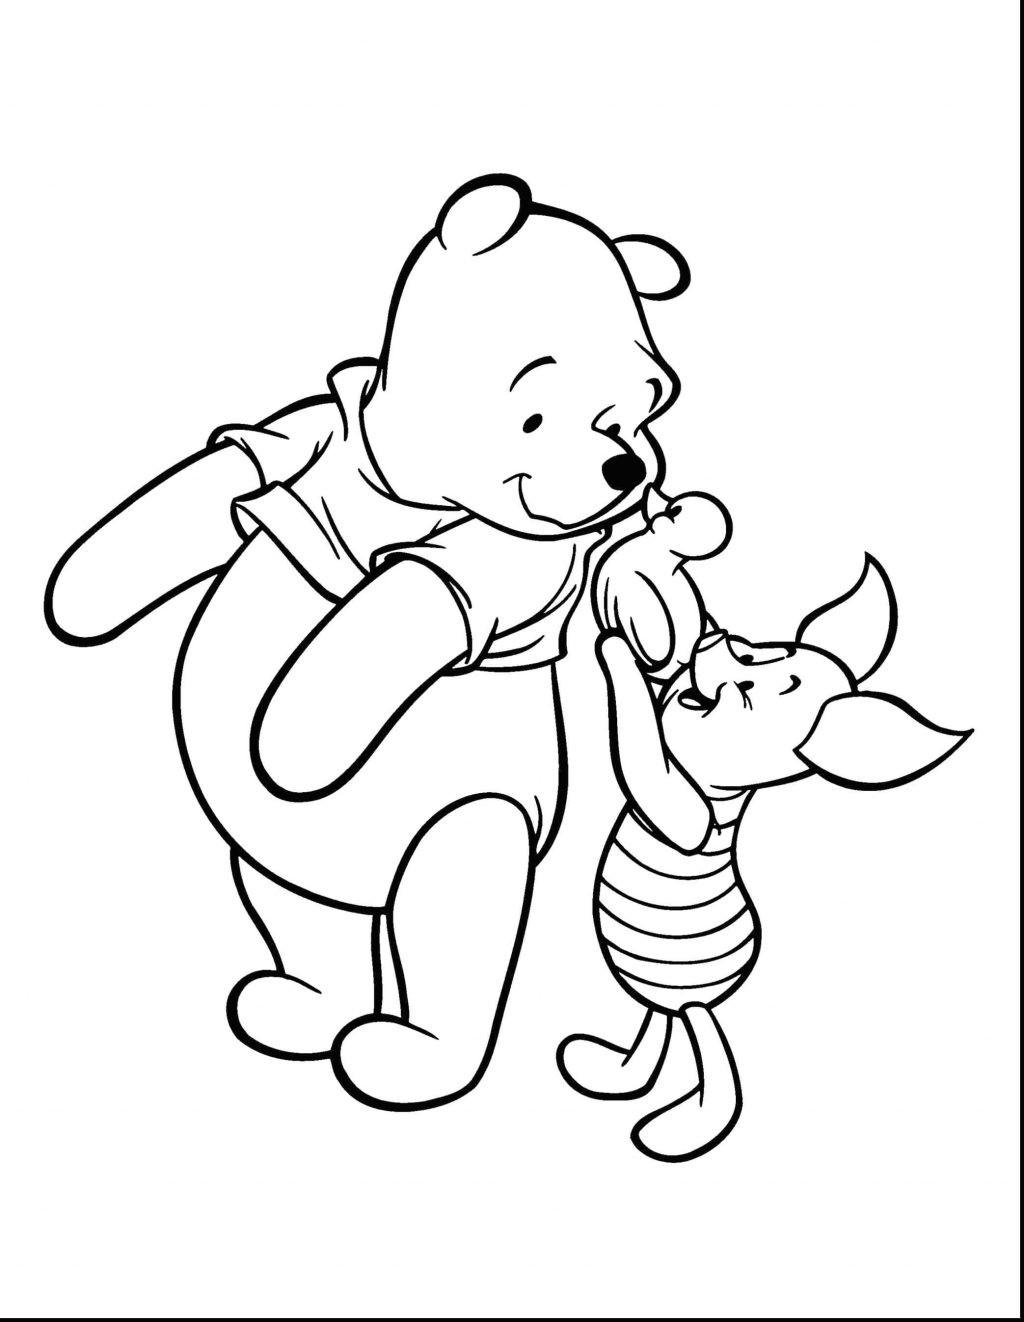 Winnie The Pooh Piglet Coloring Pages At Getcolorings pour [%Winnie The Pooh Coloring Pages,+60%|Winnie The Pooh Coloring Pages,+60%%]